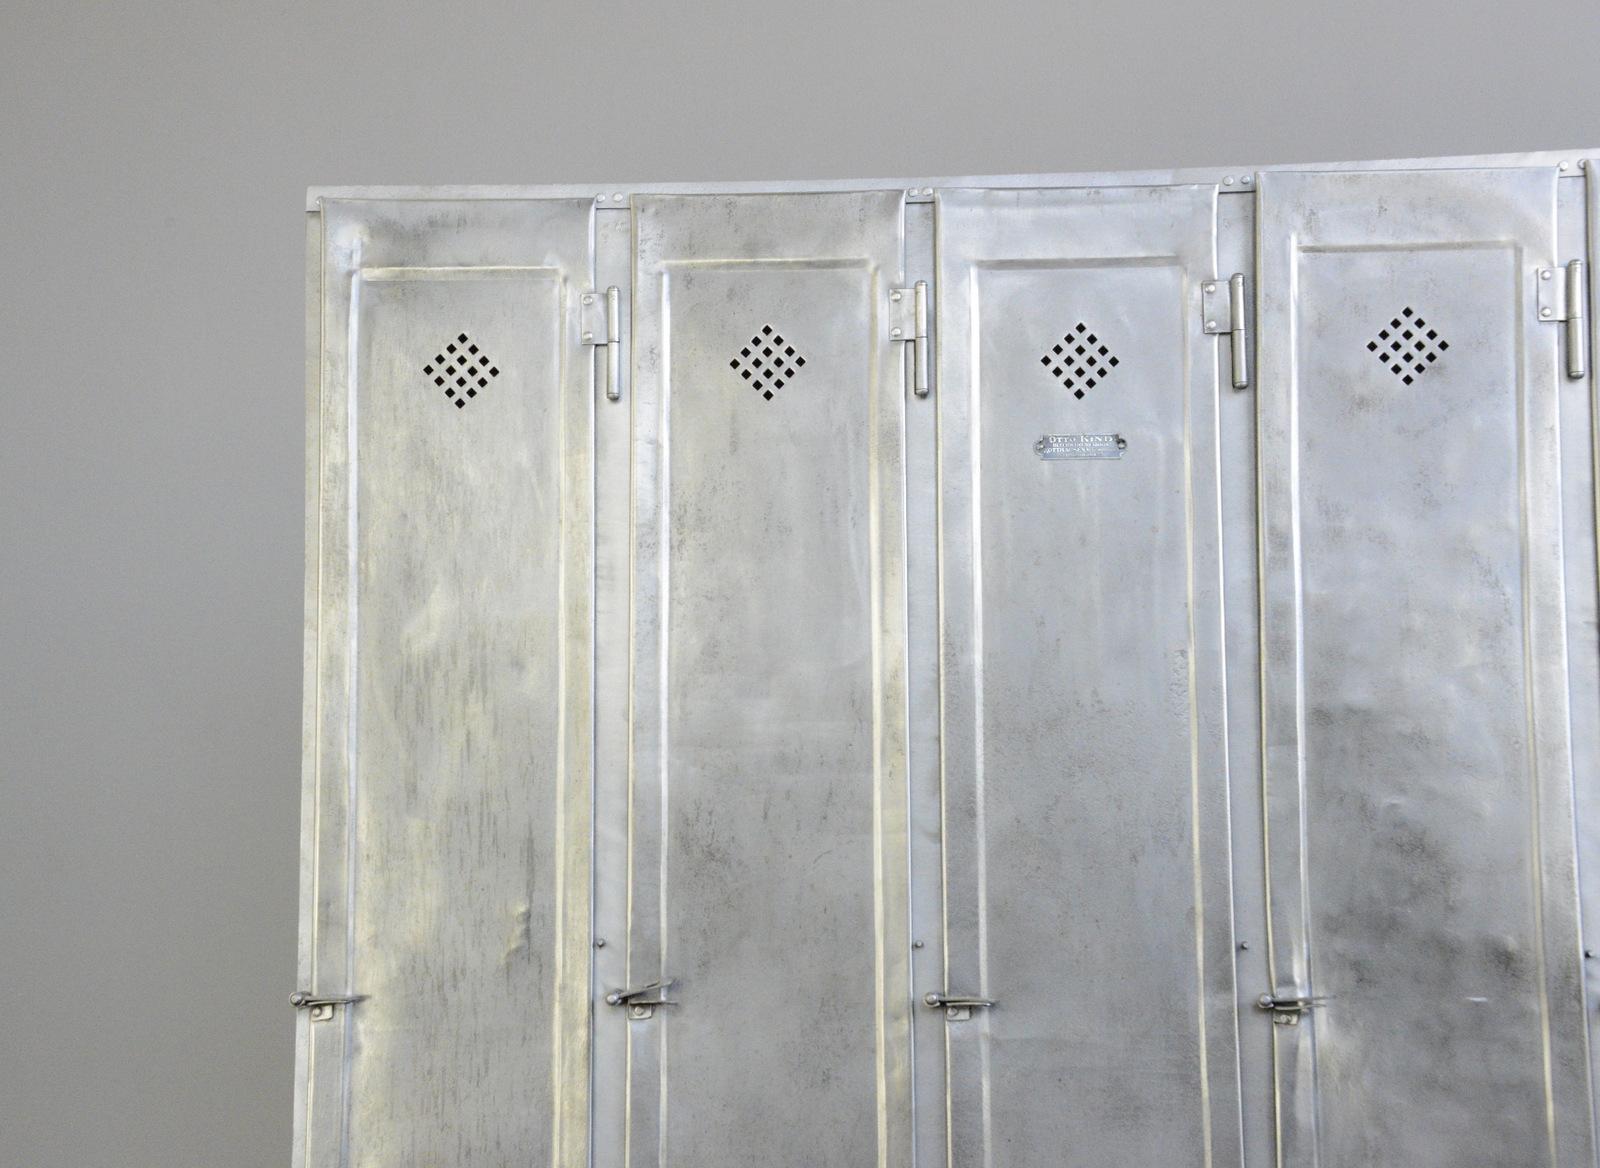 Early 20th Century Five-Door Industrial Lockers by Otto Kind, circa 1920s